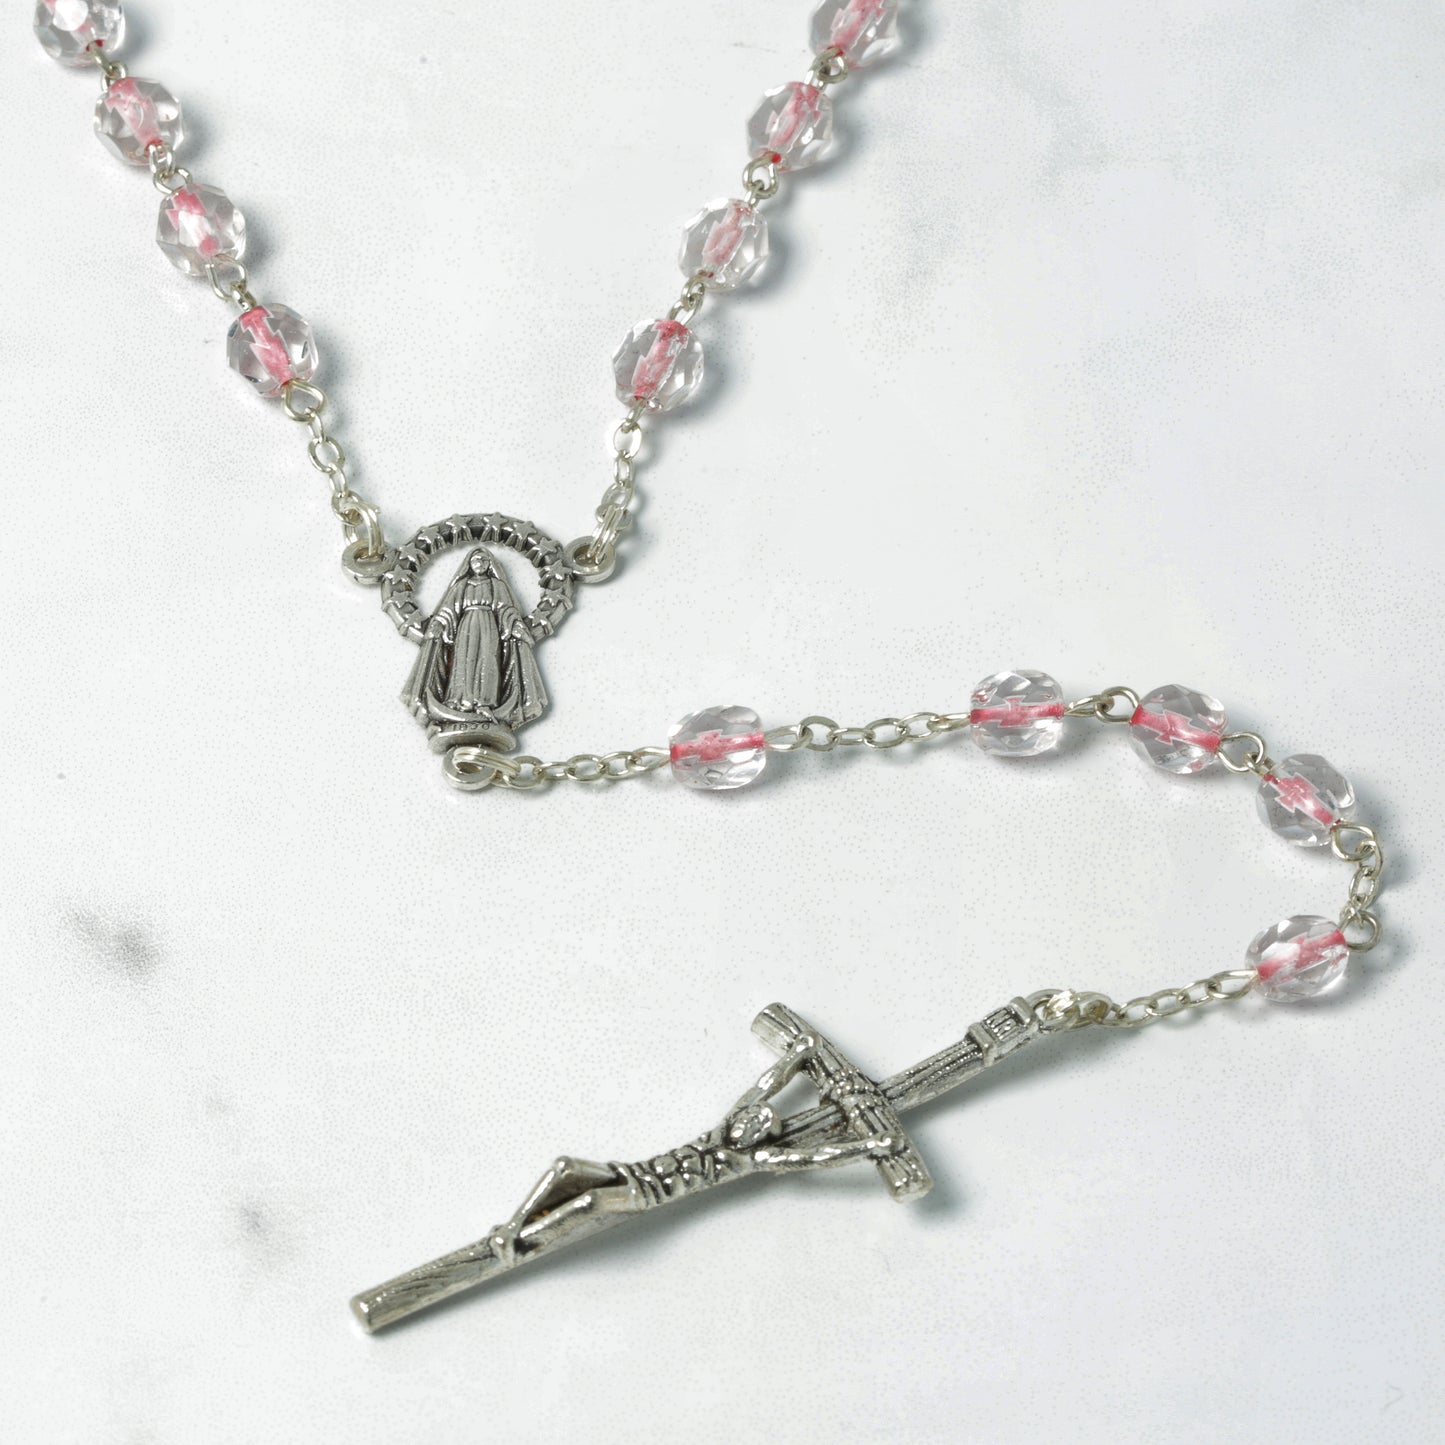 Pink Soul Crystal Rosary with Box Souvenirs from Italy